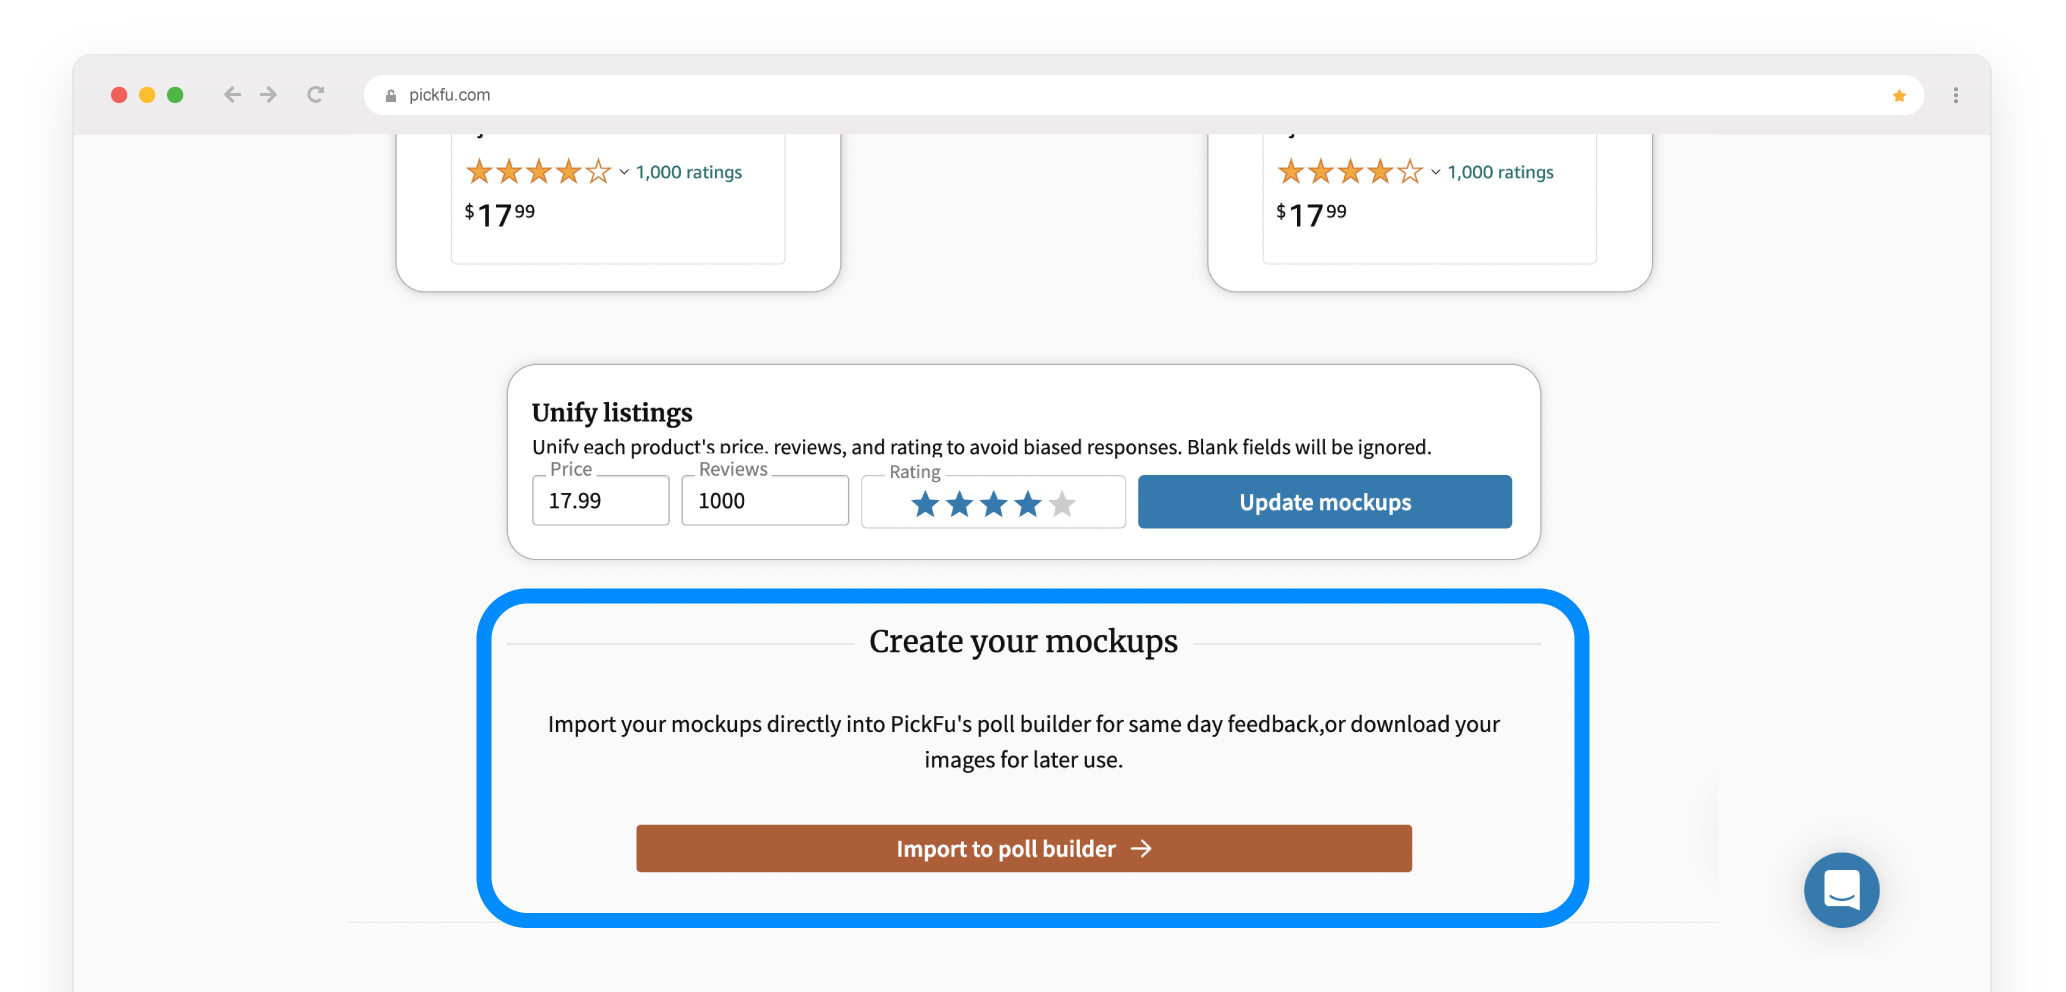 Screenshot of how to import mockups from the Amazon Mockup Generator into the Poll Builder